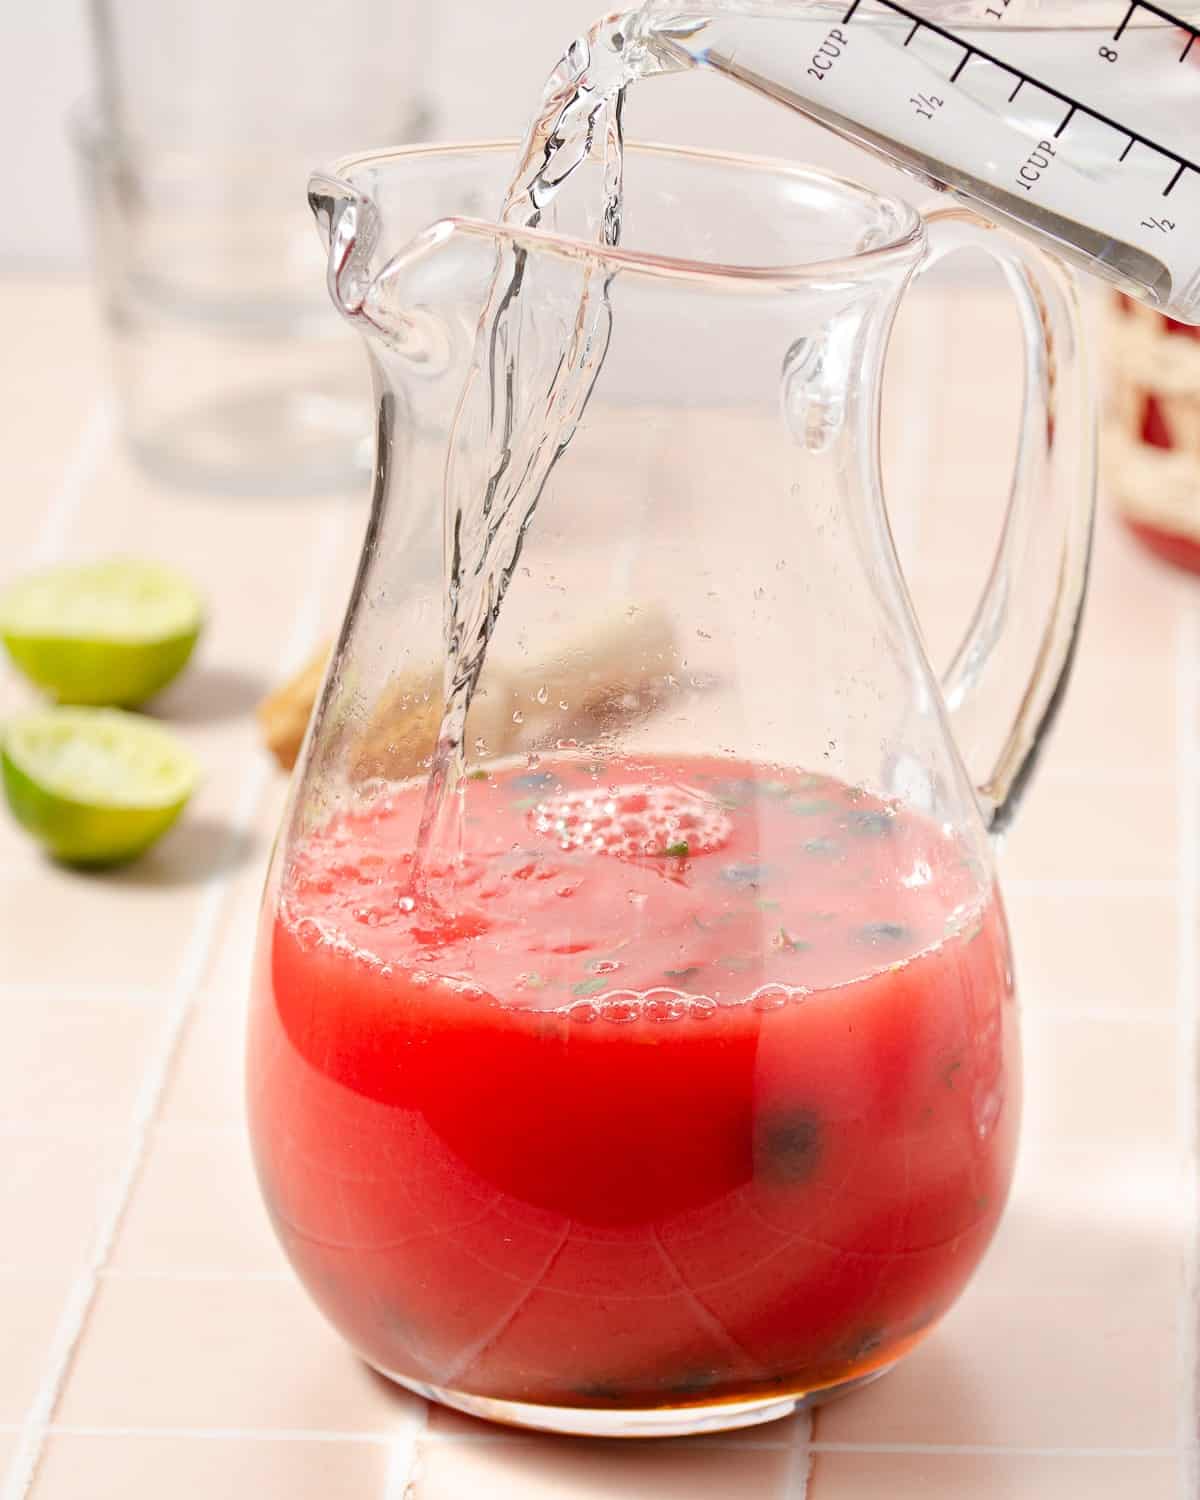 pouring vodka into a pitcher of watermelon juice blueberries and lime juice